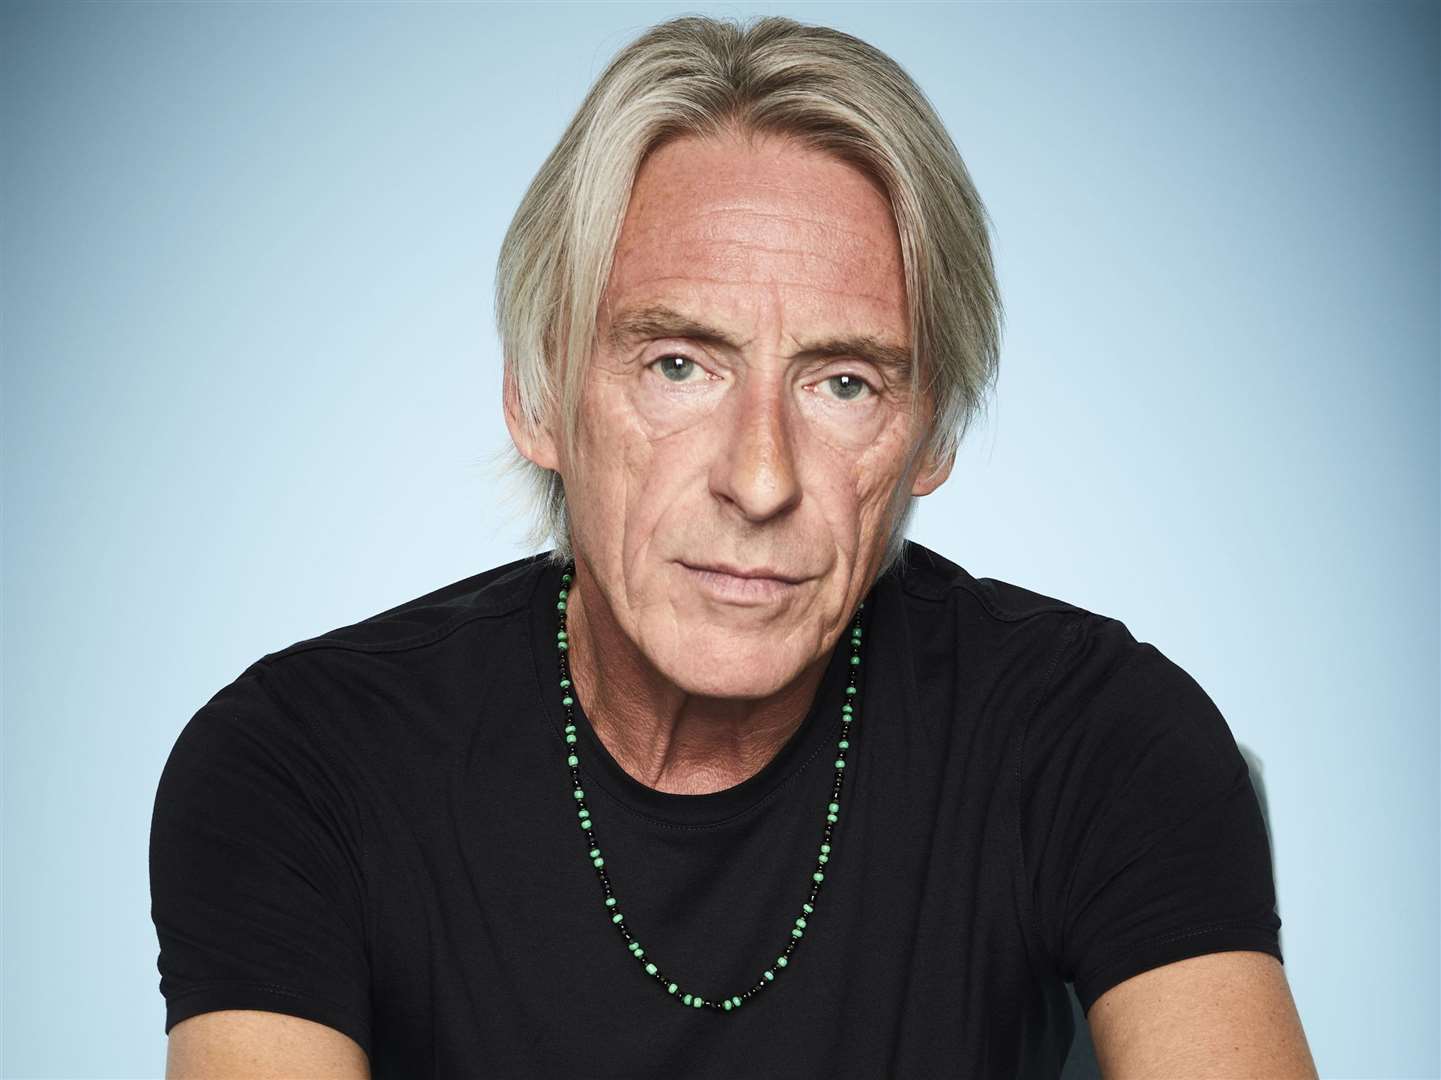 Paul Weller will be at Bedgebury Pinetum in Goudhurst for a Forest Live gig in the summer 2019